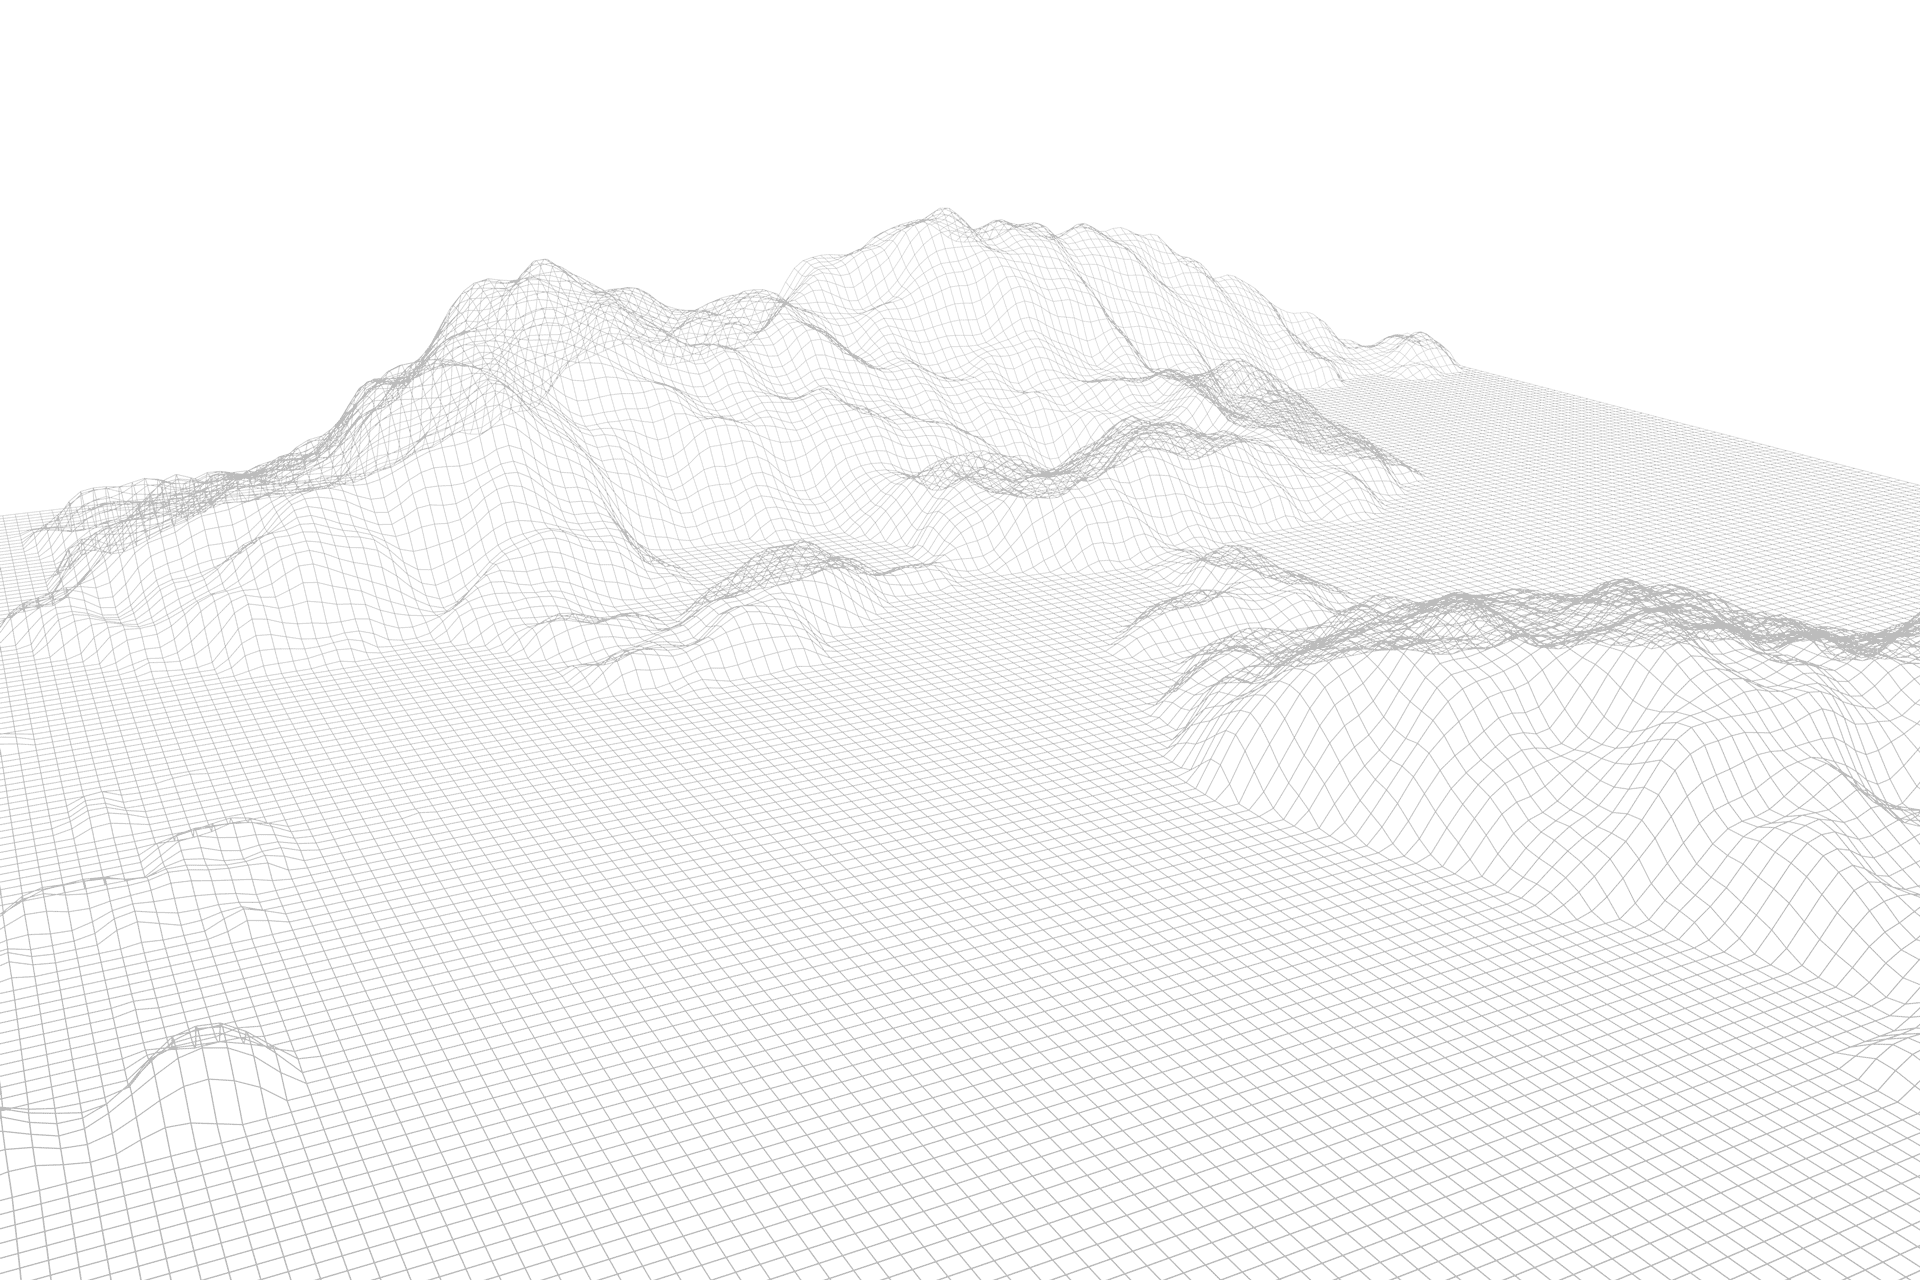 Mountain Made Up of Grid Mesh